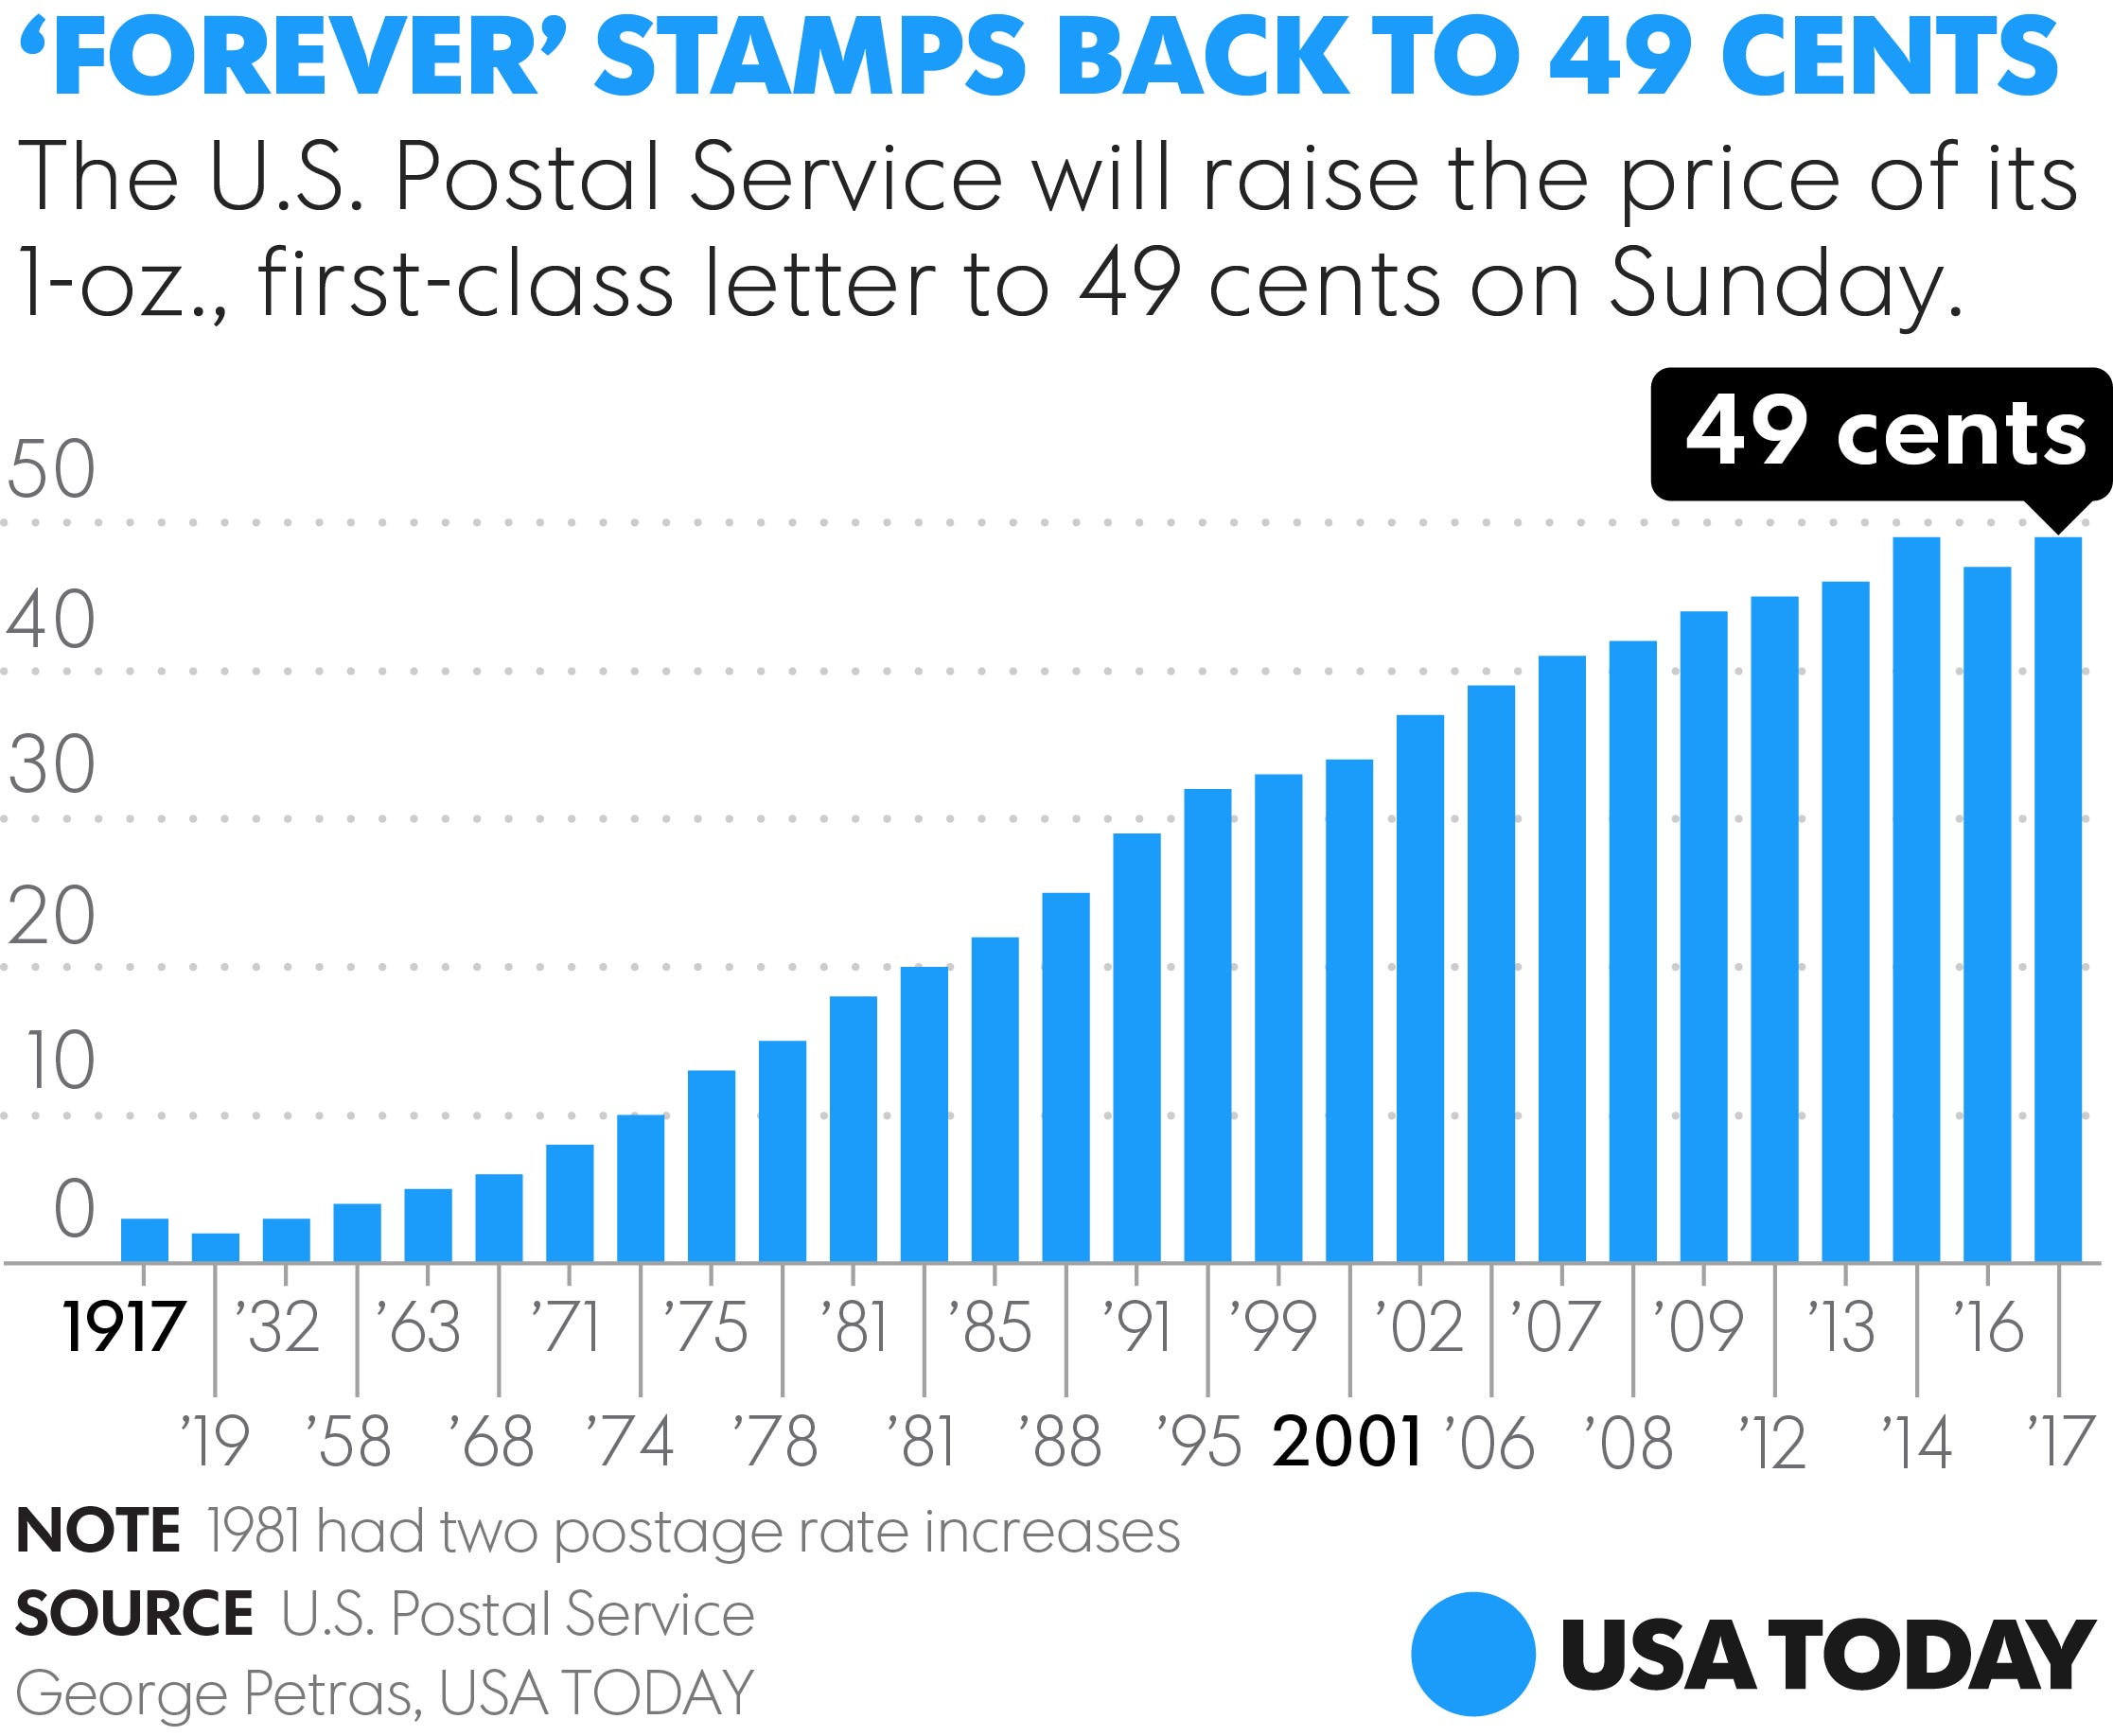 Forever stamps will cost more starting Sunday